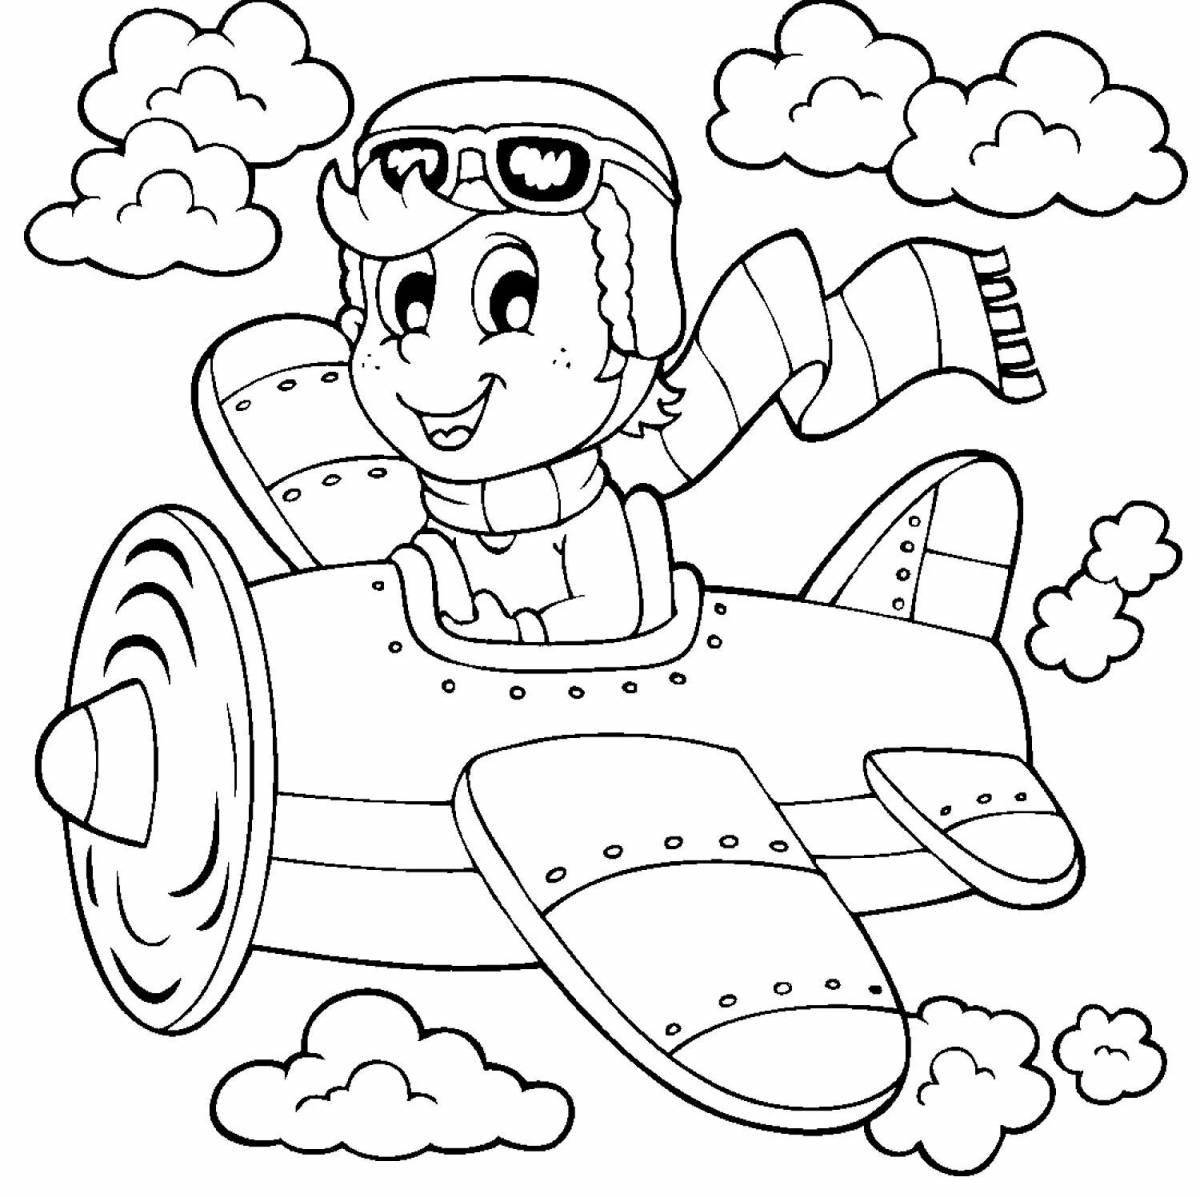 Playful baby pilot coloring page